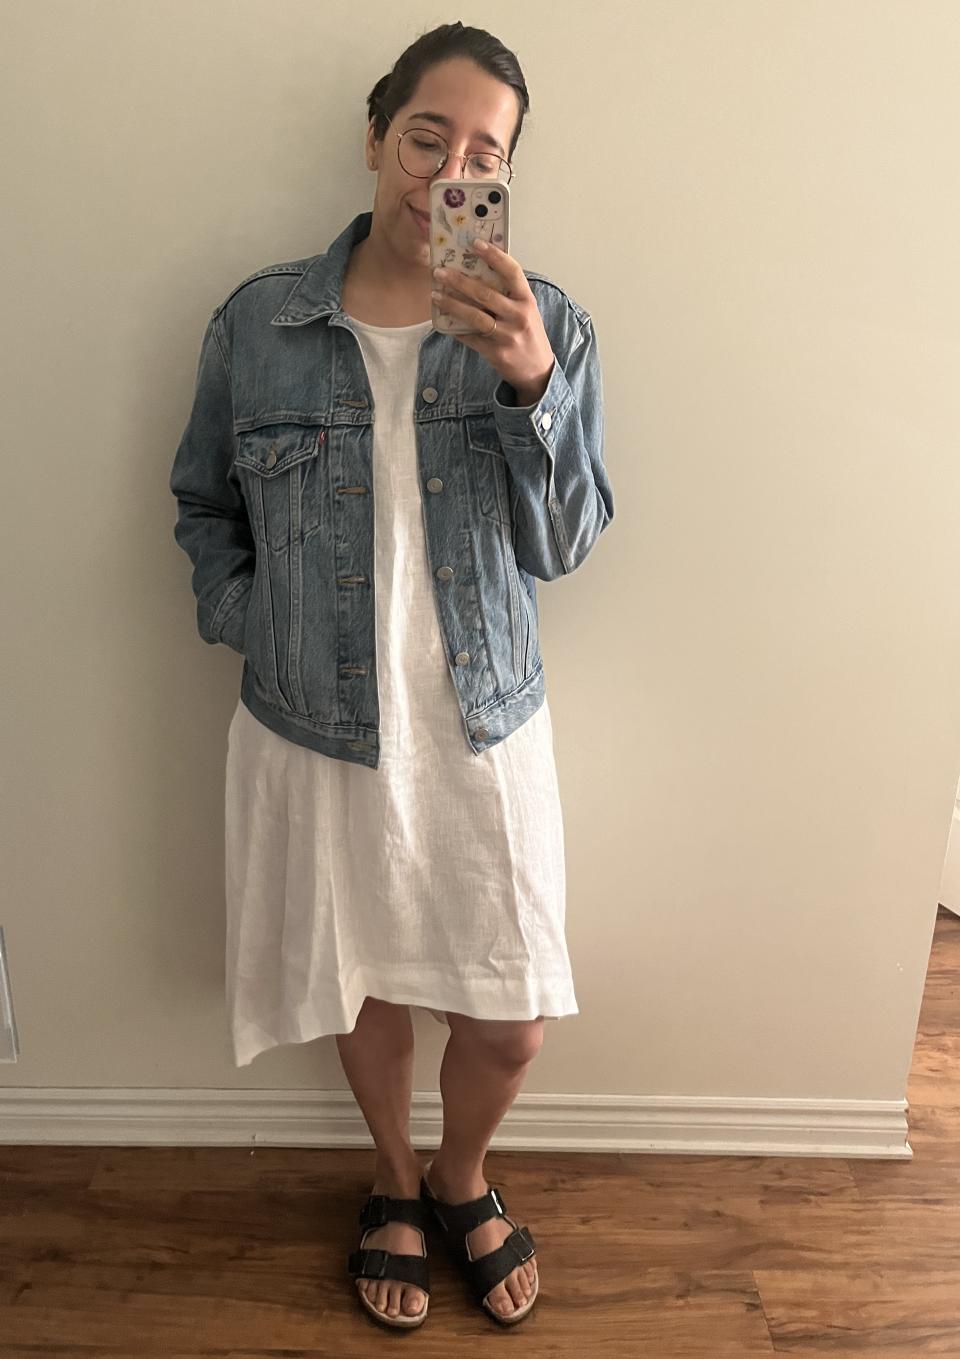 This time, I went for a more casual look by pairing the Magic Linen dress with a denim jacket.